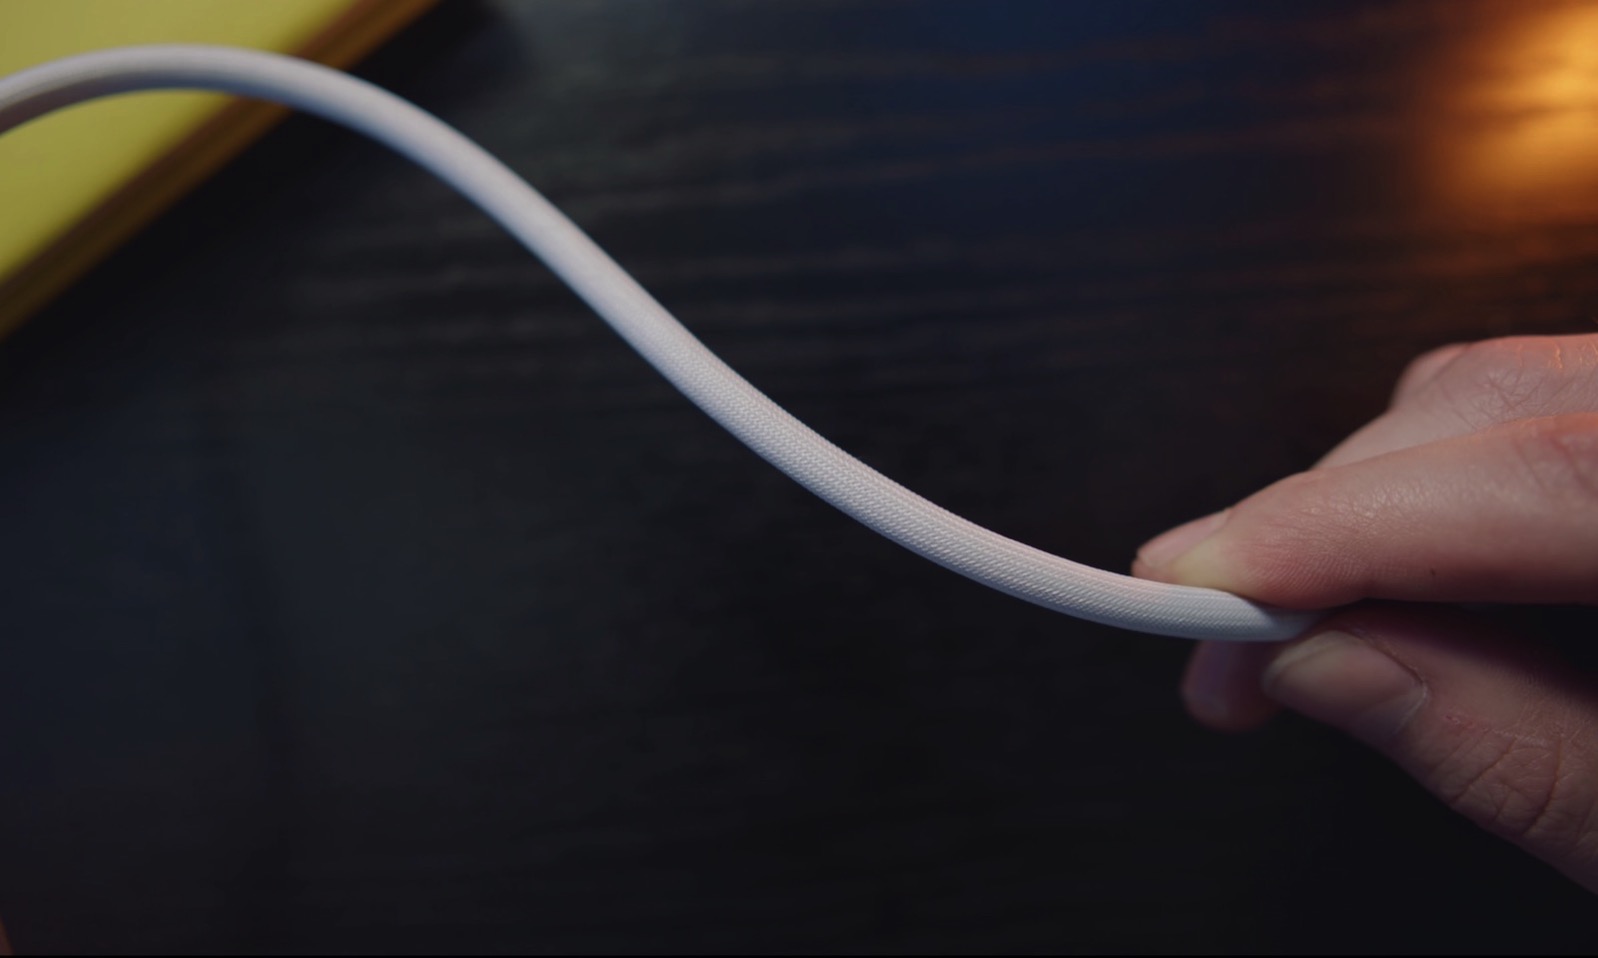 HomePod-Cable.jpg